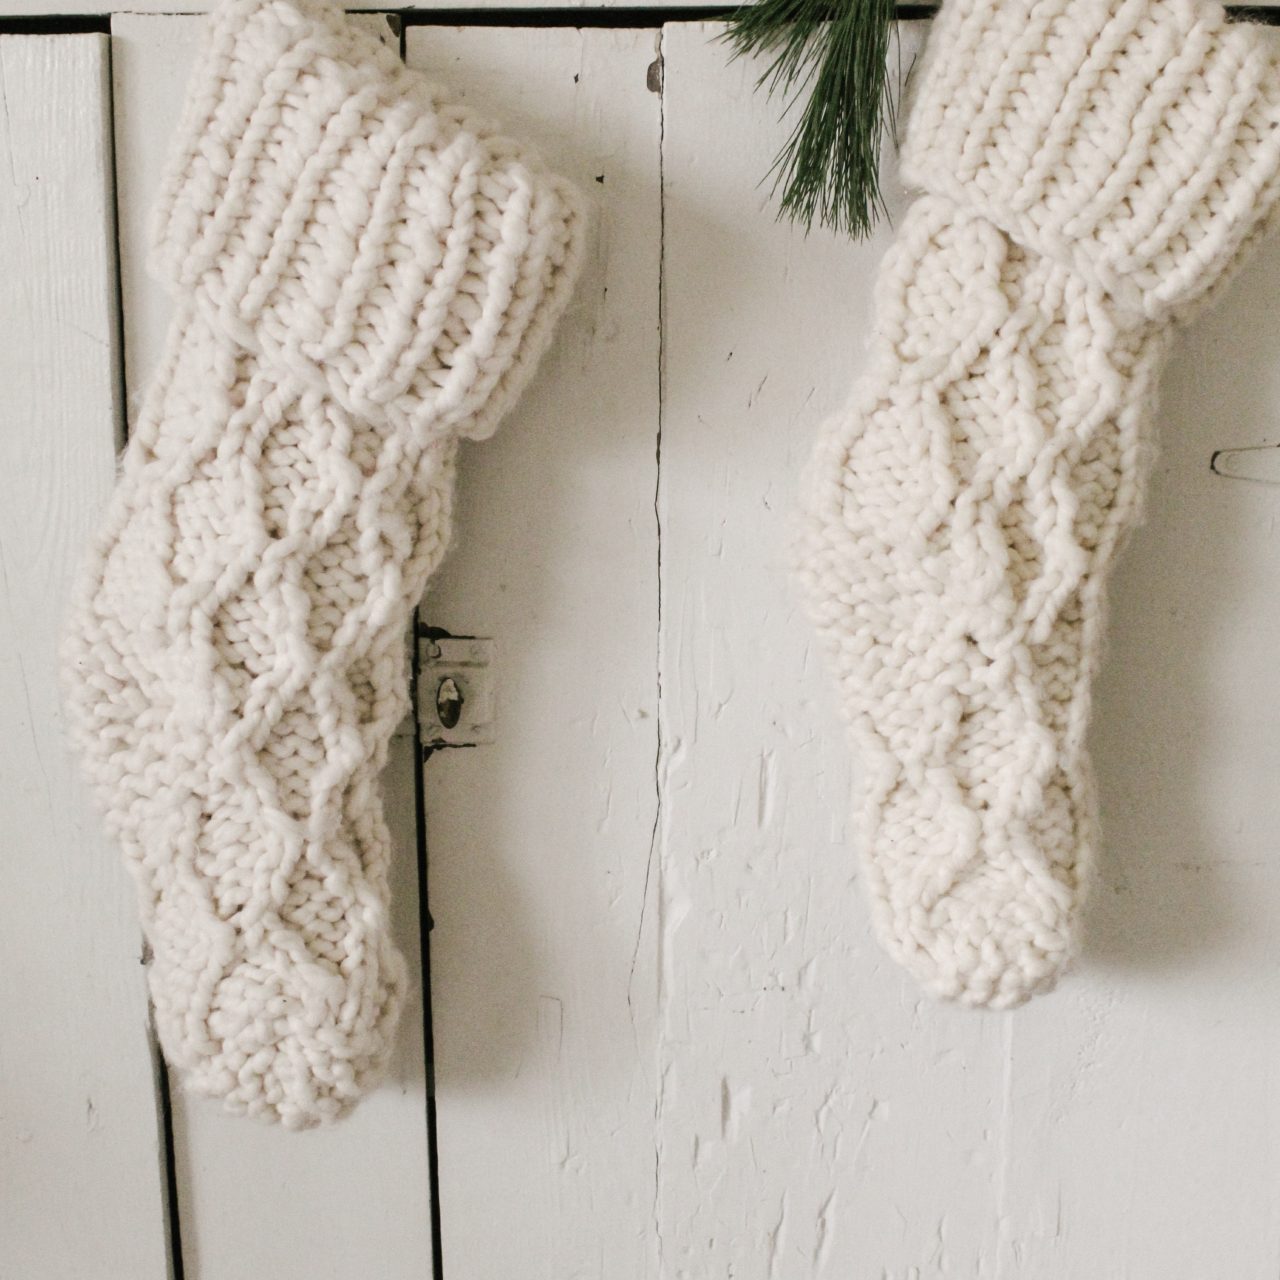 Three Ways to Hang Stockings Without a Mantel